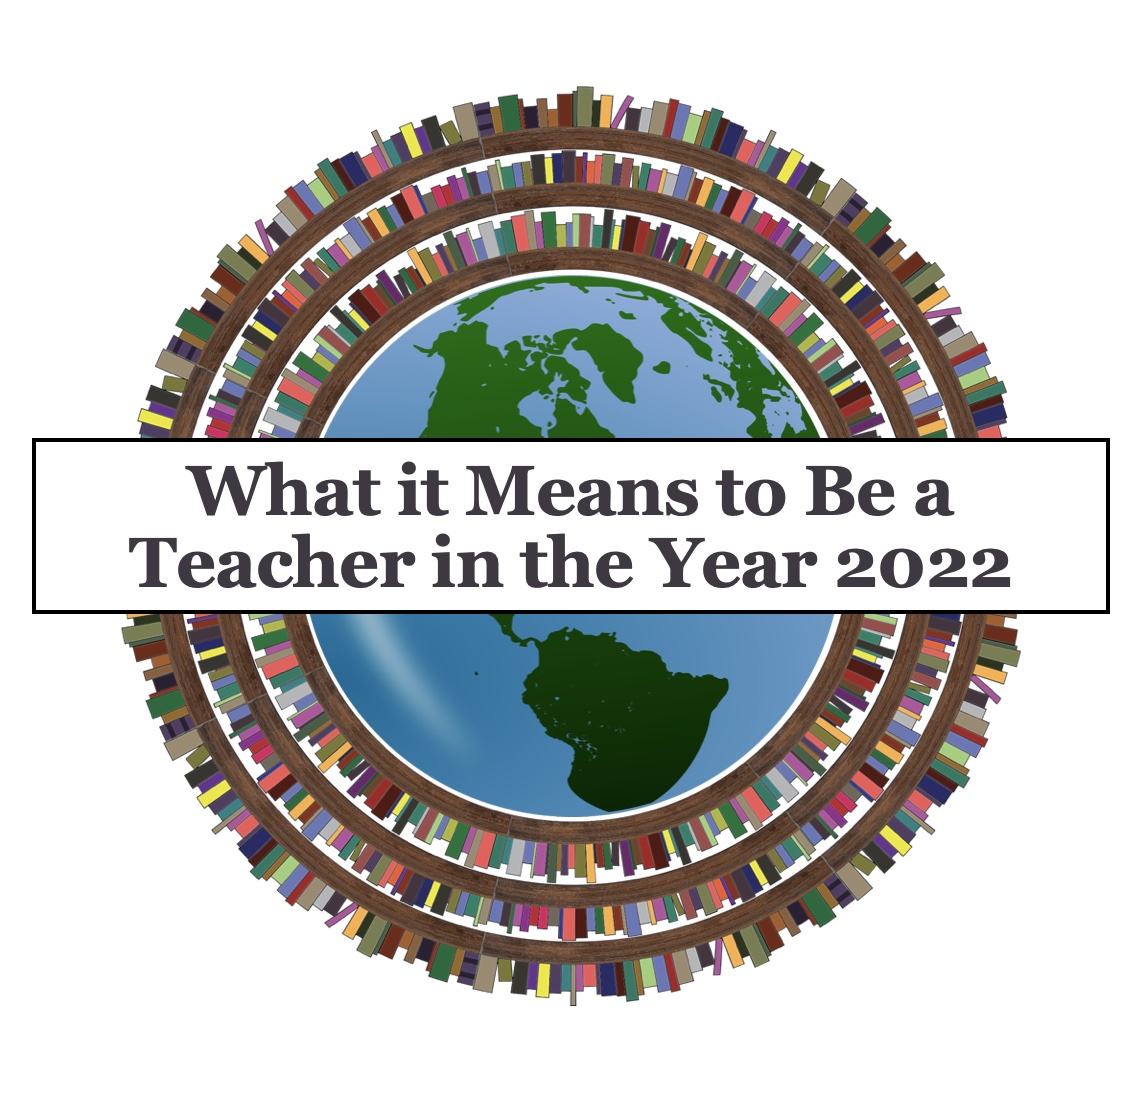 What It Means to Be a Teacher in the Year 2022